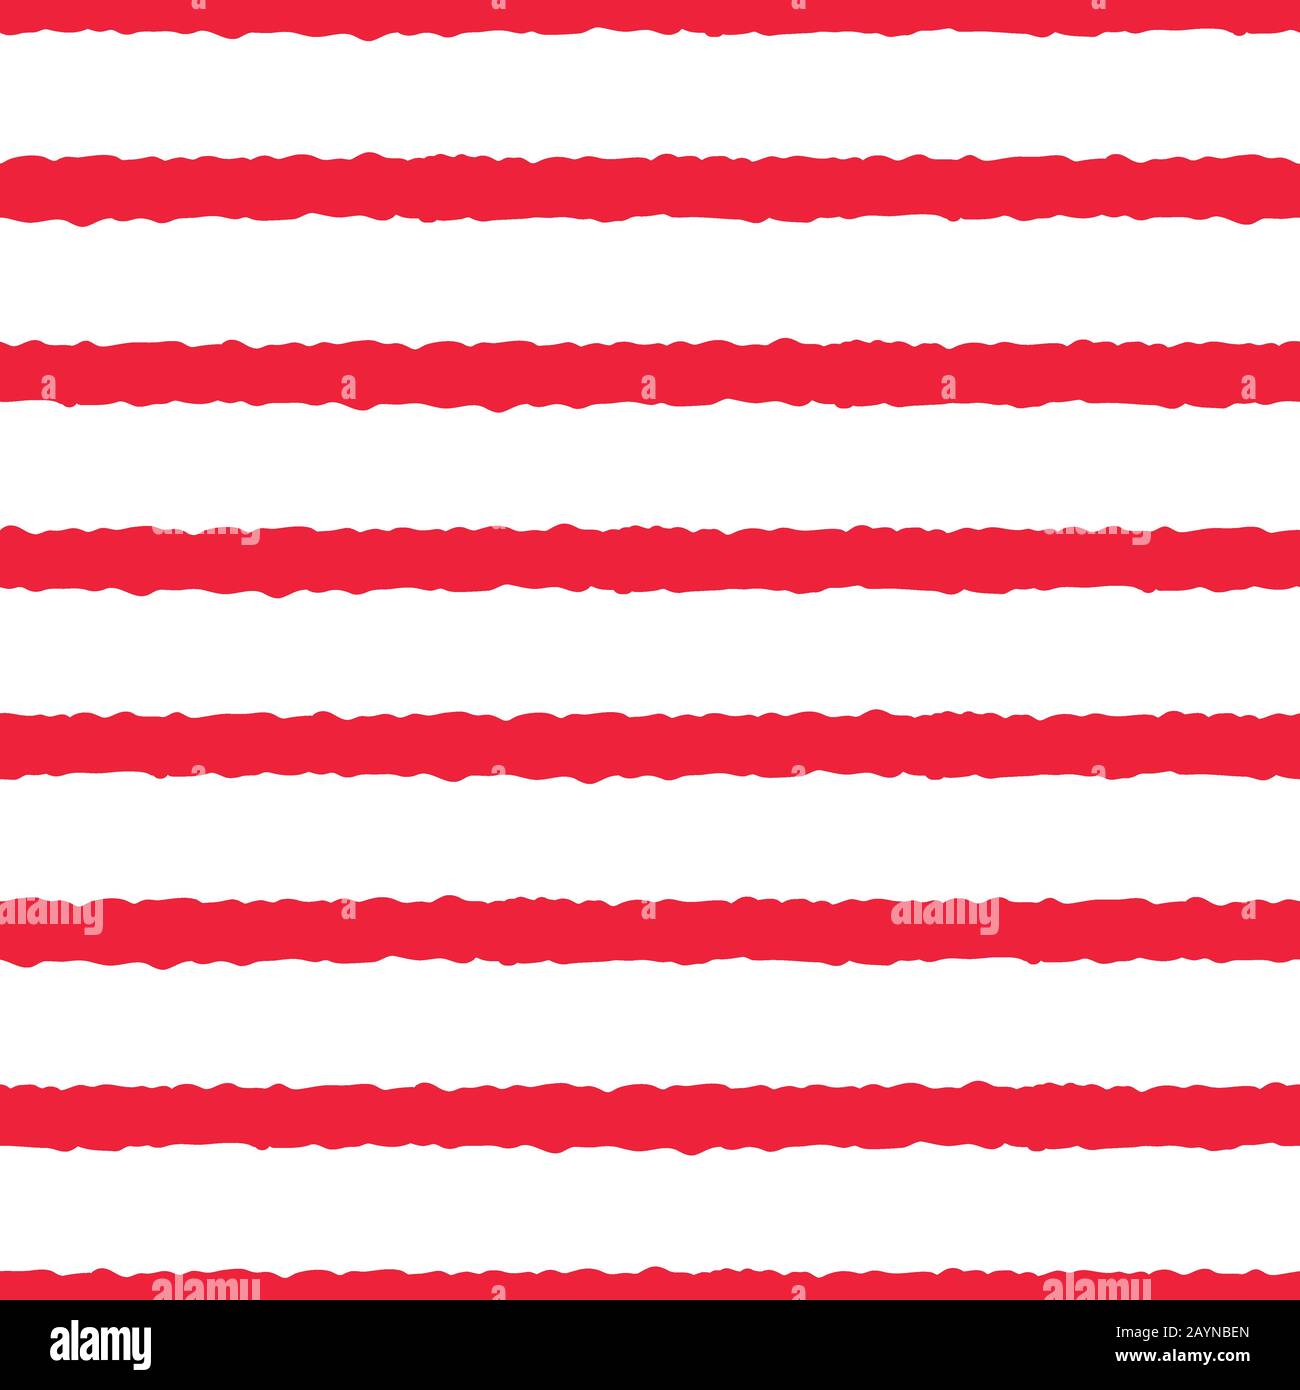 Red, white rough stripes texture seamless pattern. Great for modern wallpaper, backgrounds, invitations, packaging design projects. Surface pattern. Stock Vector